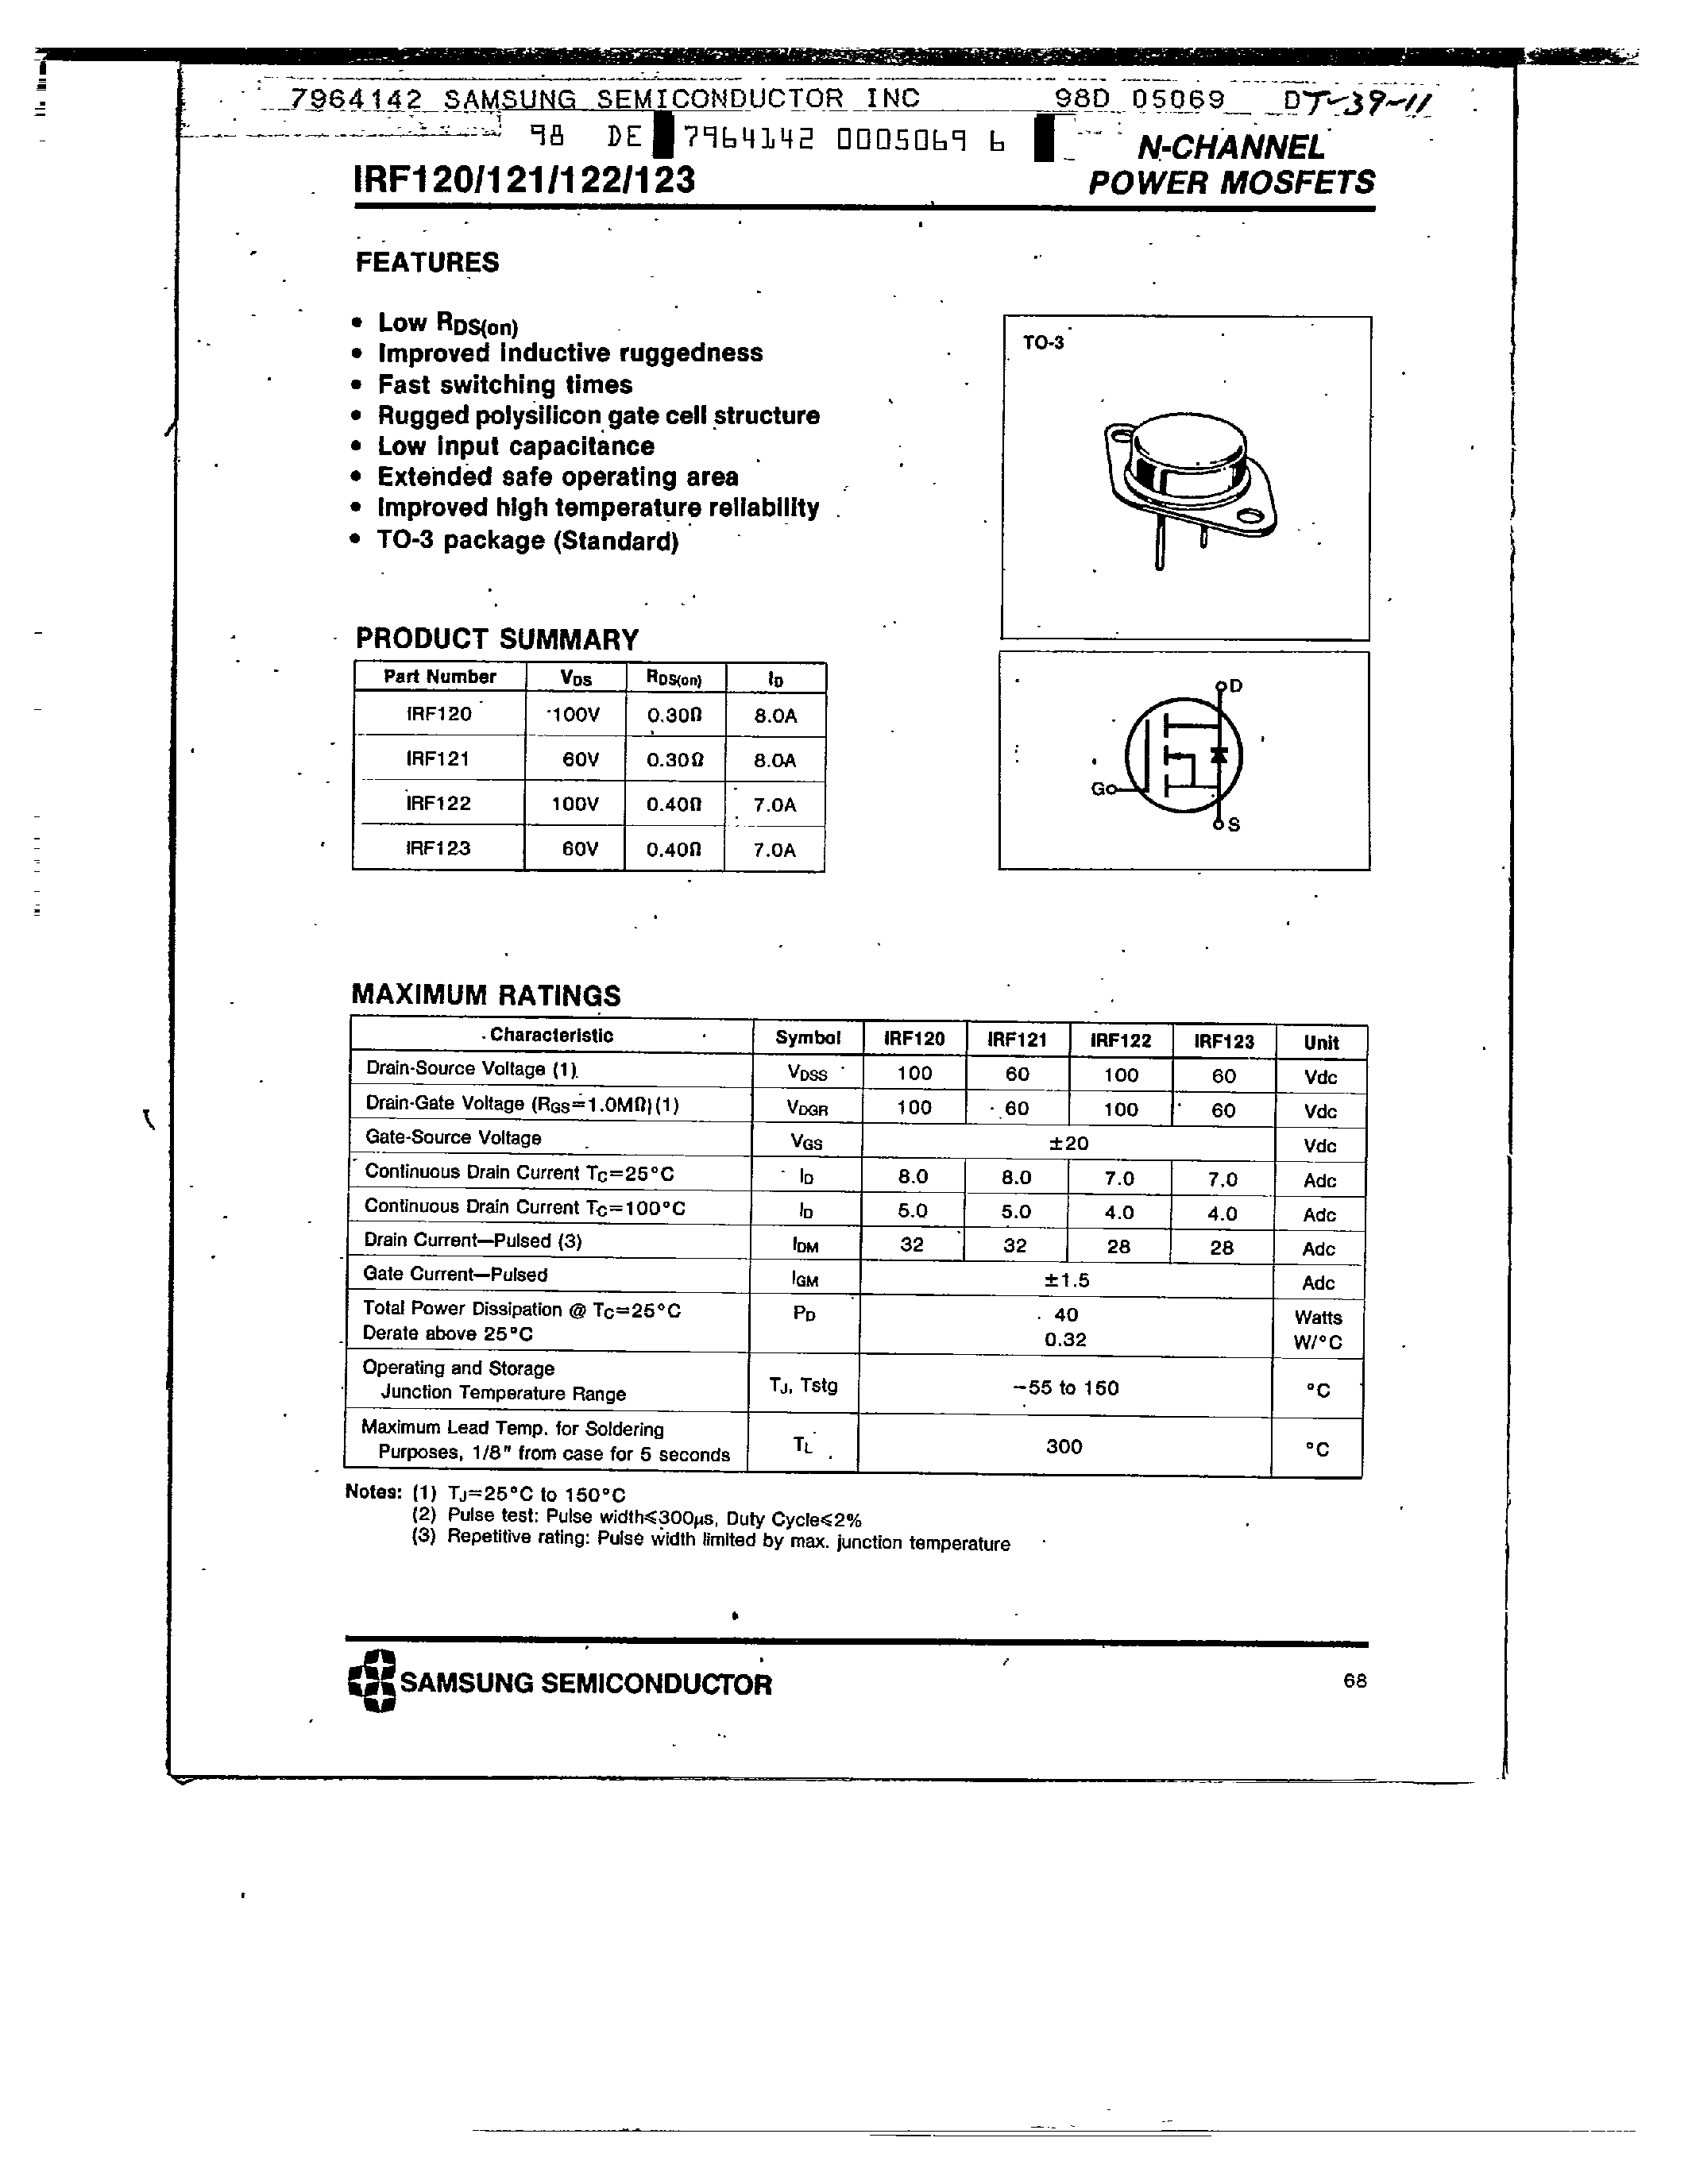 Datasheet IRF121 - N-CHANNEL POWER MOSFETS page 1